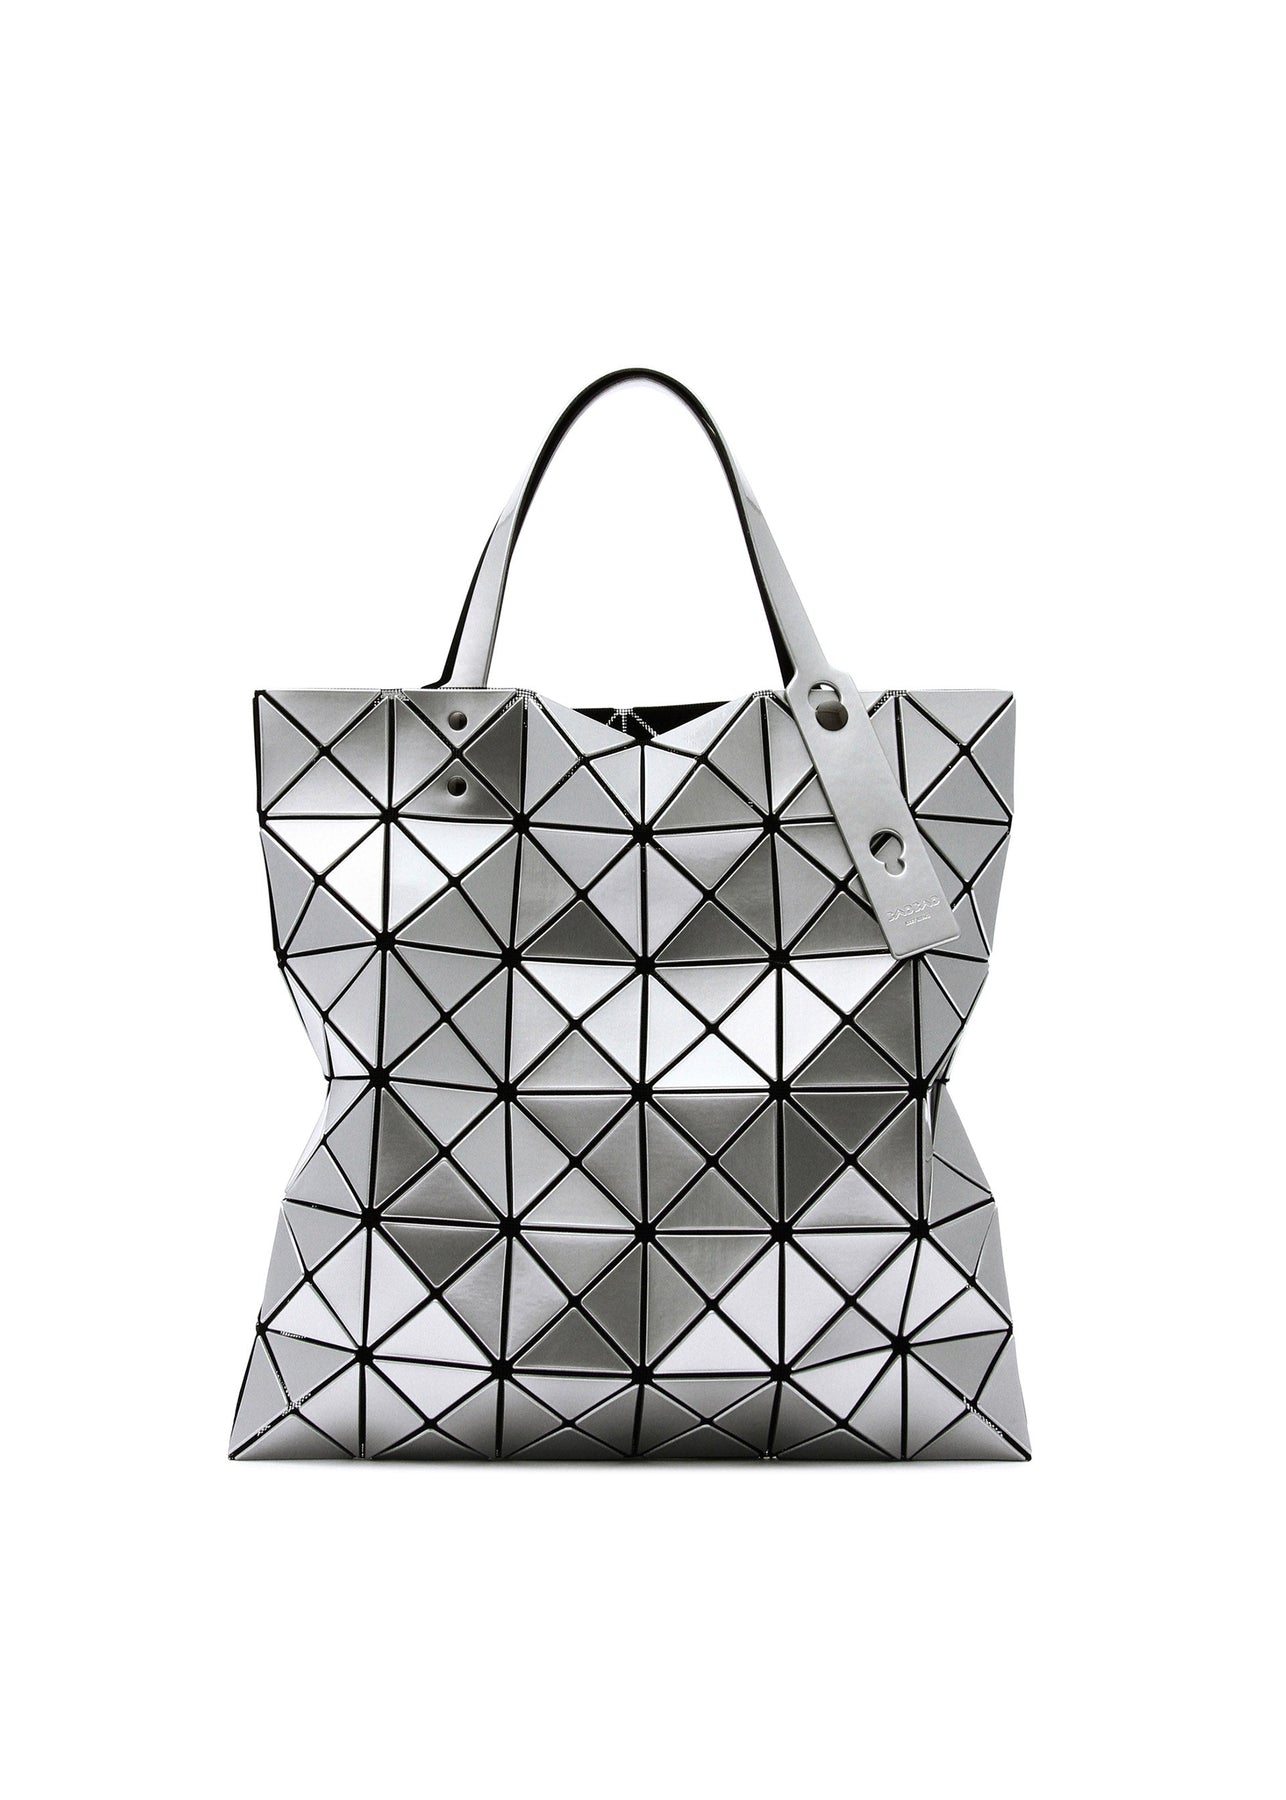 LUCENT TOTE BAG | The official ISSEY MIYAKE ONLINE STORE | ISSEY